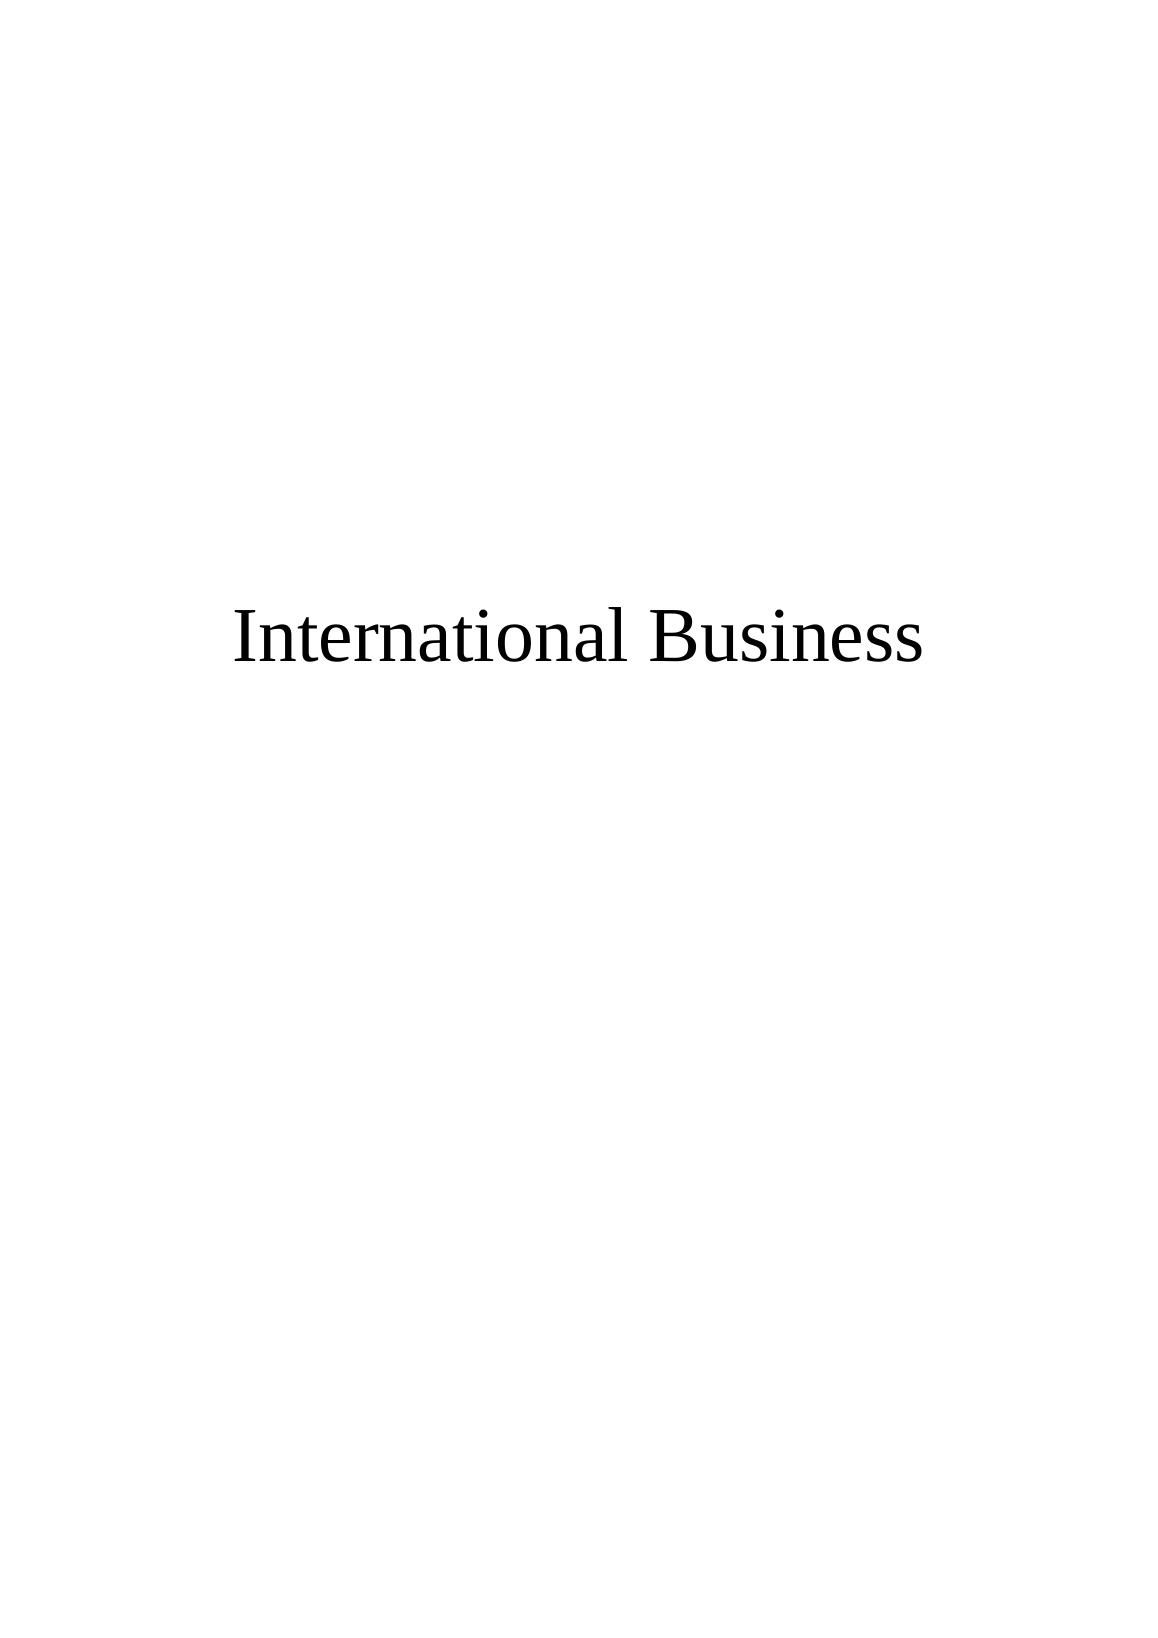 International Business: Overview, Trade, and Globalization_1